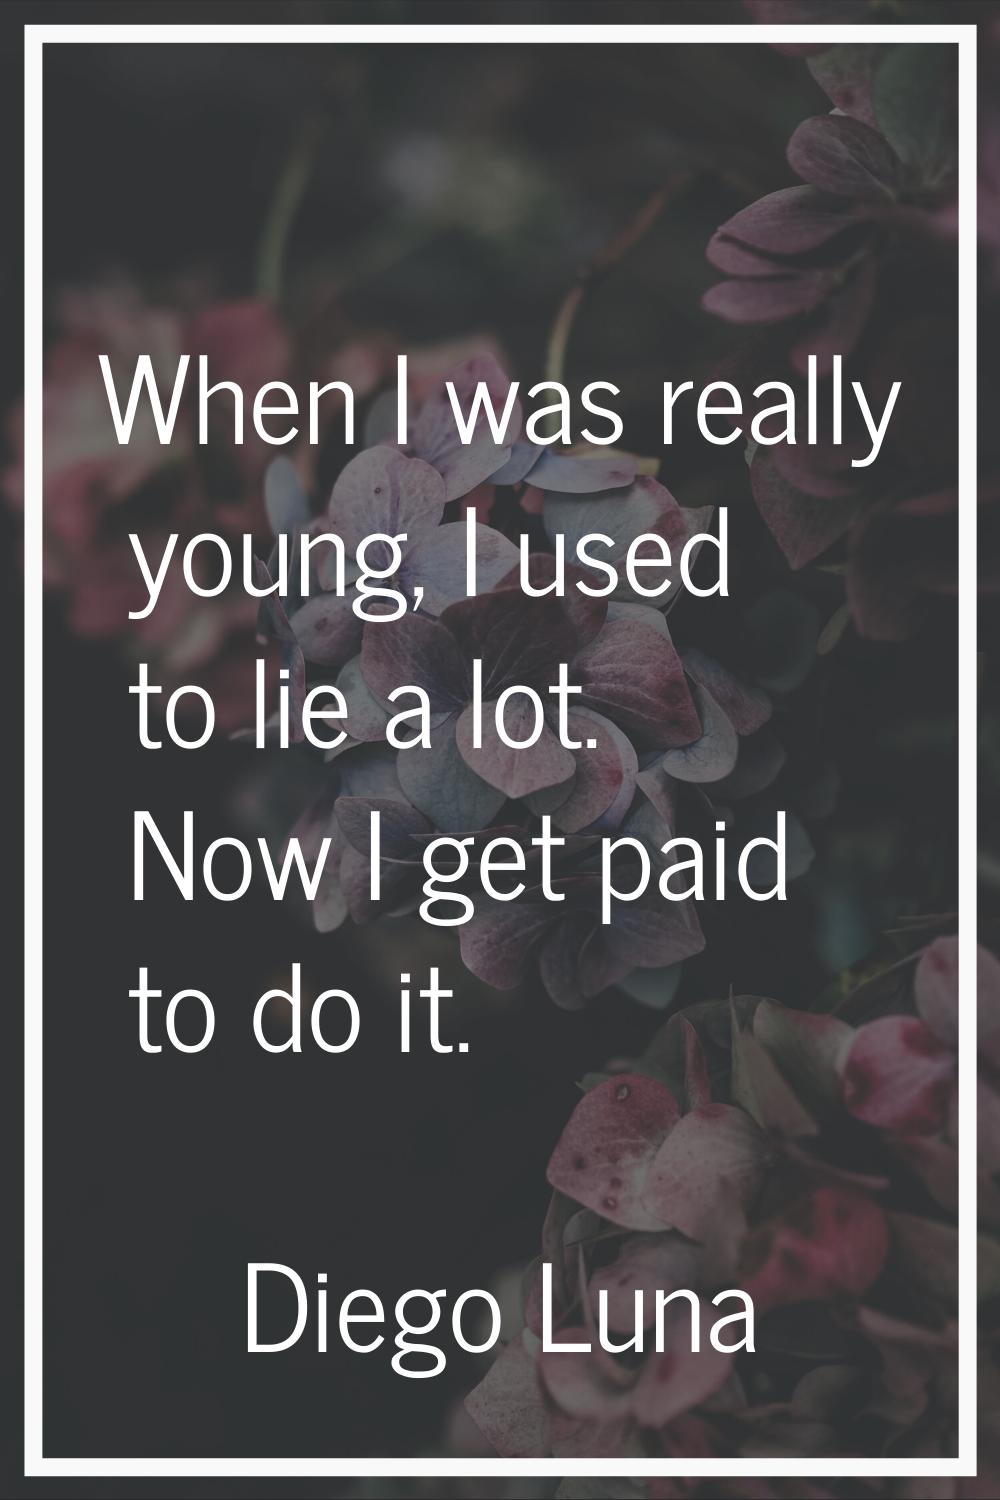 When I was really young, I used to lie a lot. Now I get paid to do it.